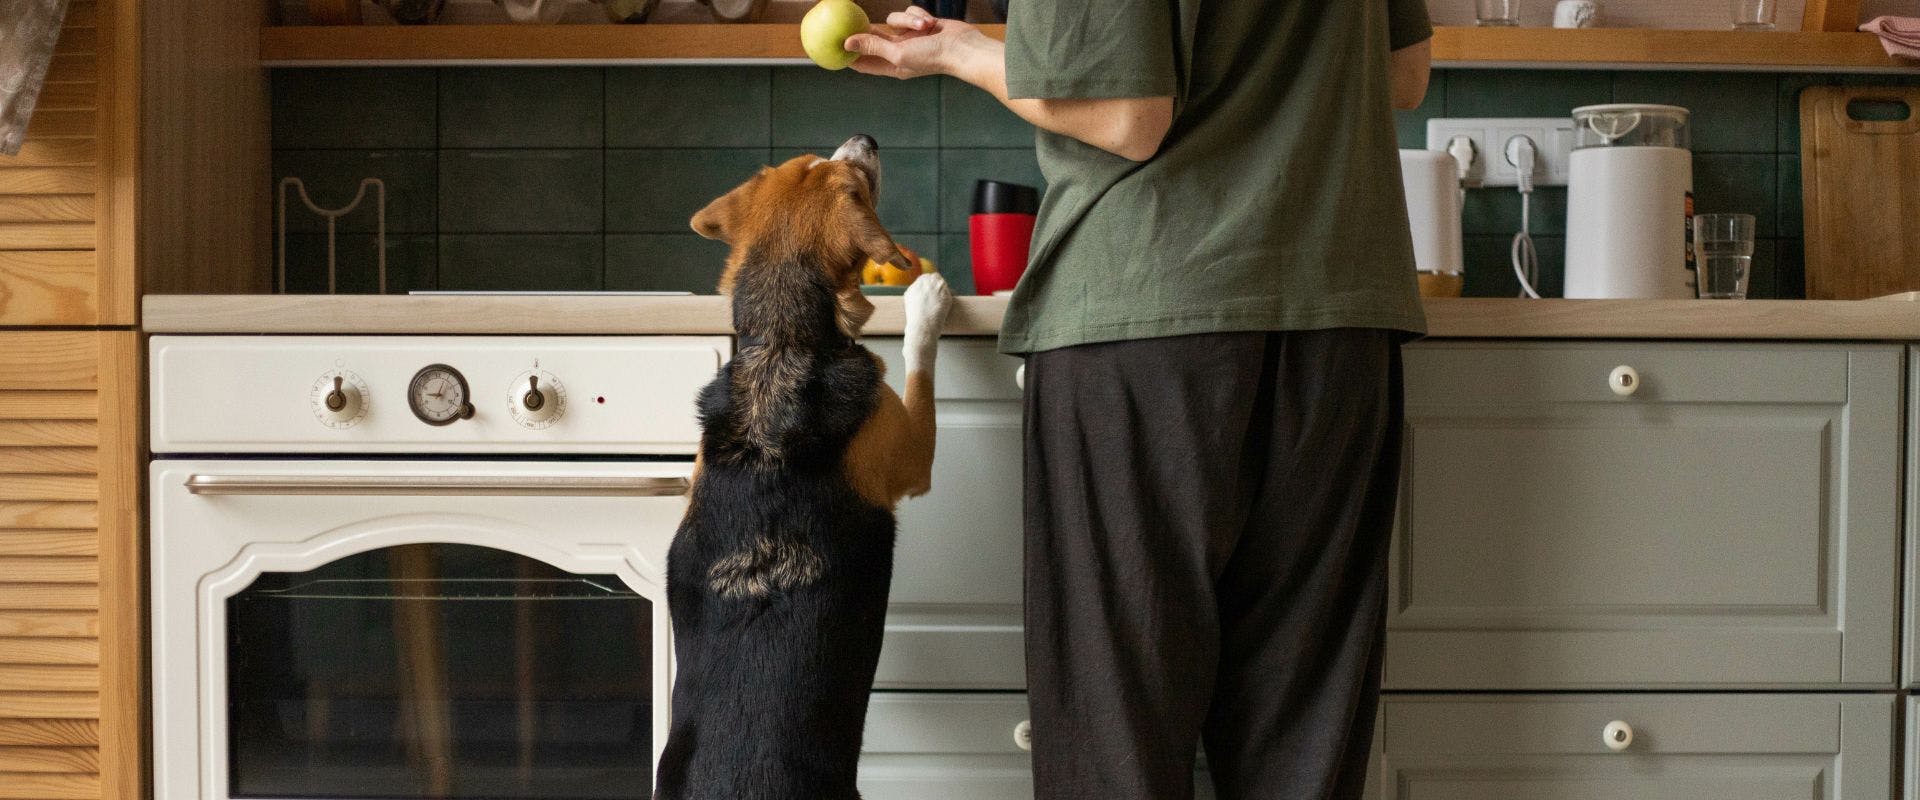 Dog jumping up at the kitchen side, eager to eat the apple in the person's hand